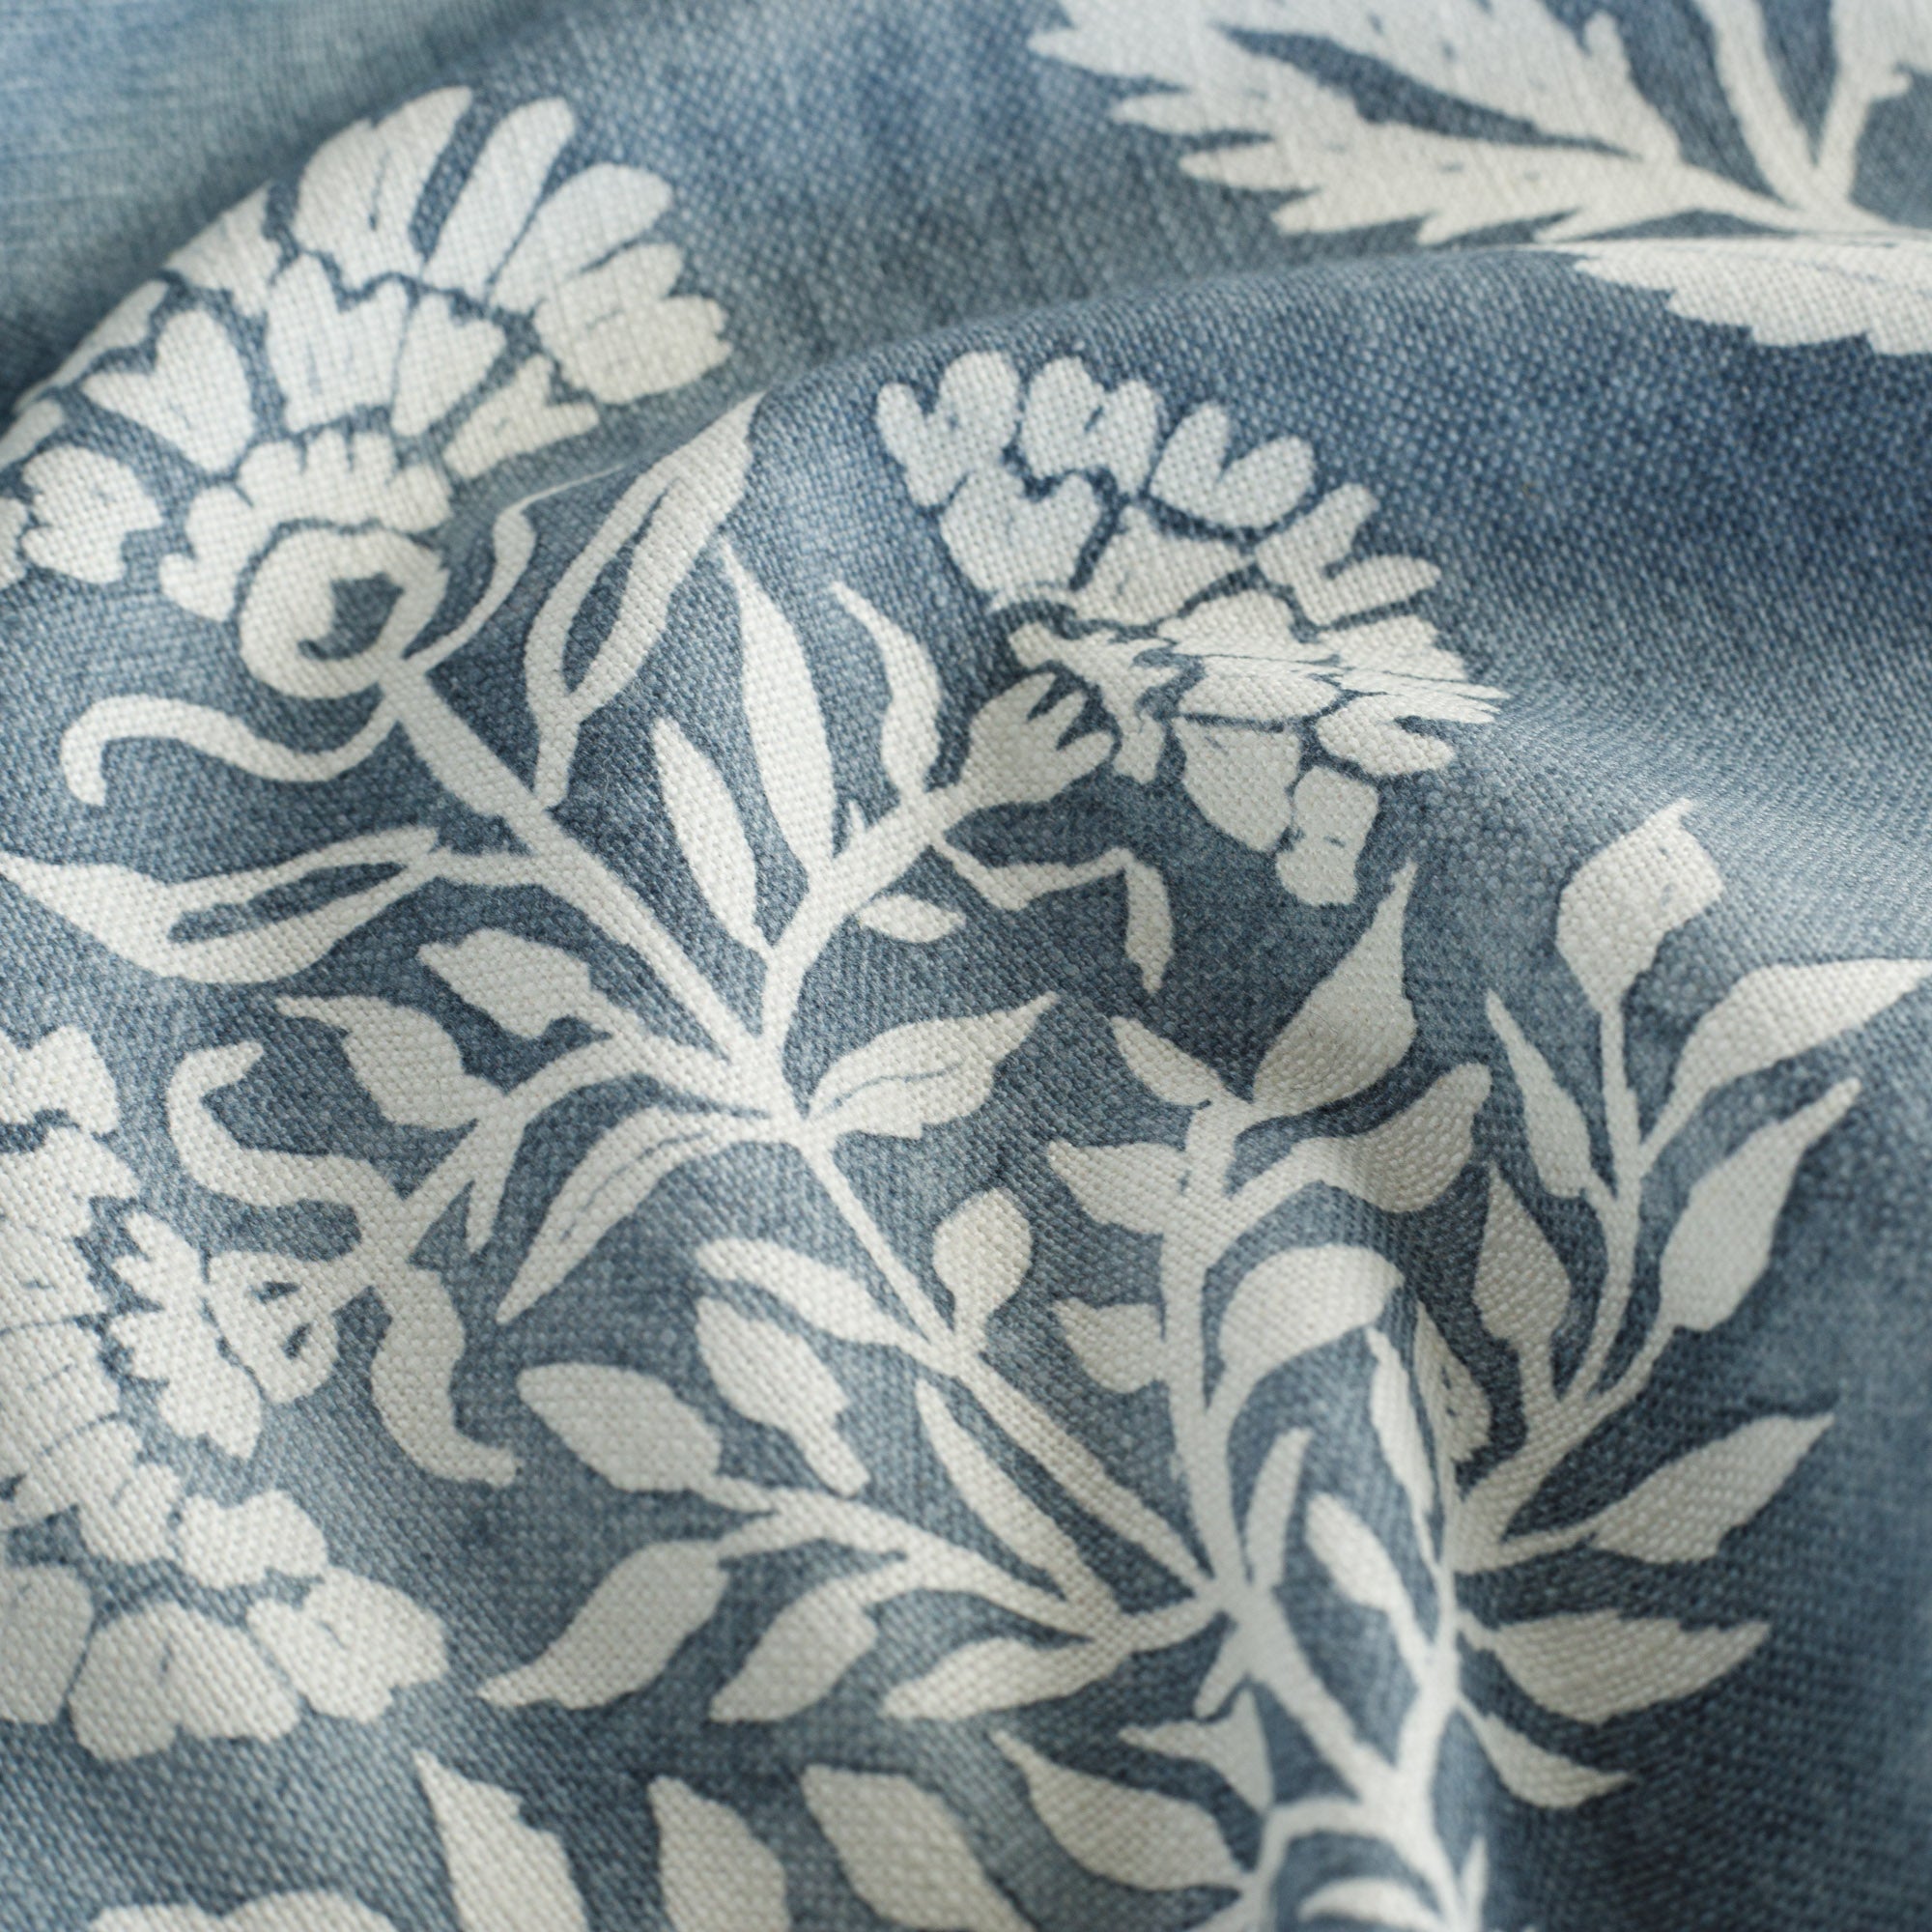 an indigo blue and white floral print fabric : close up view